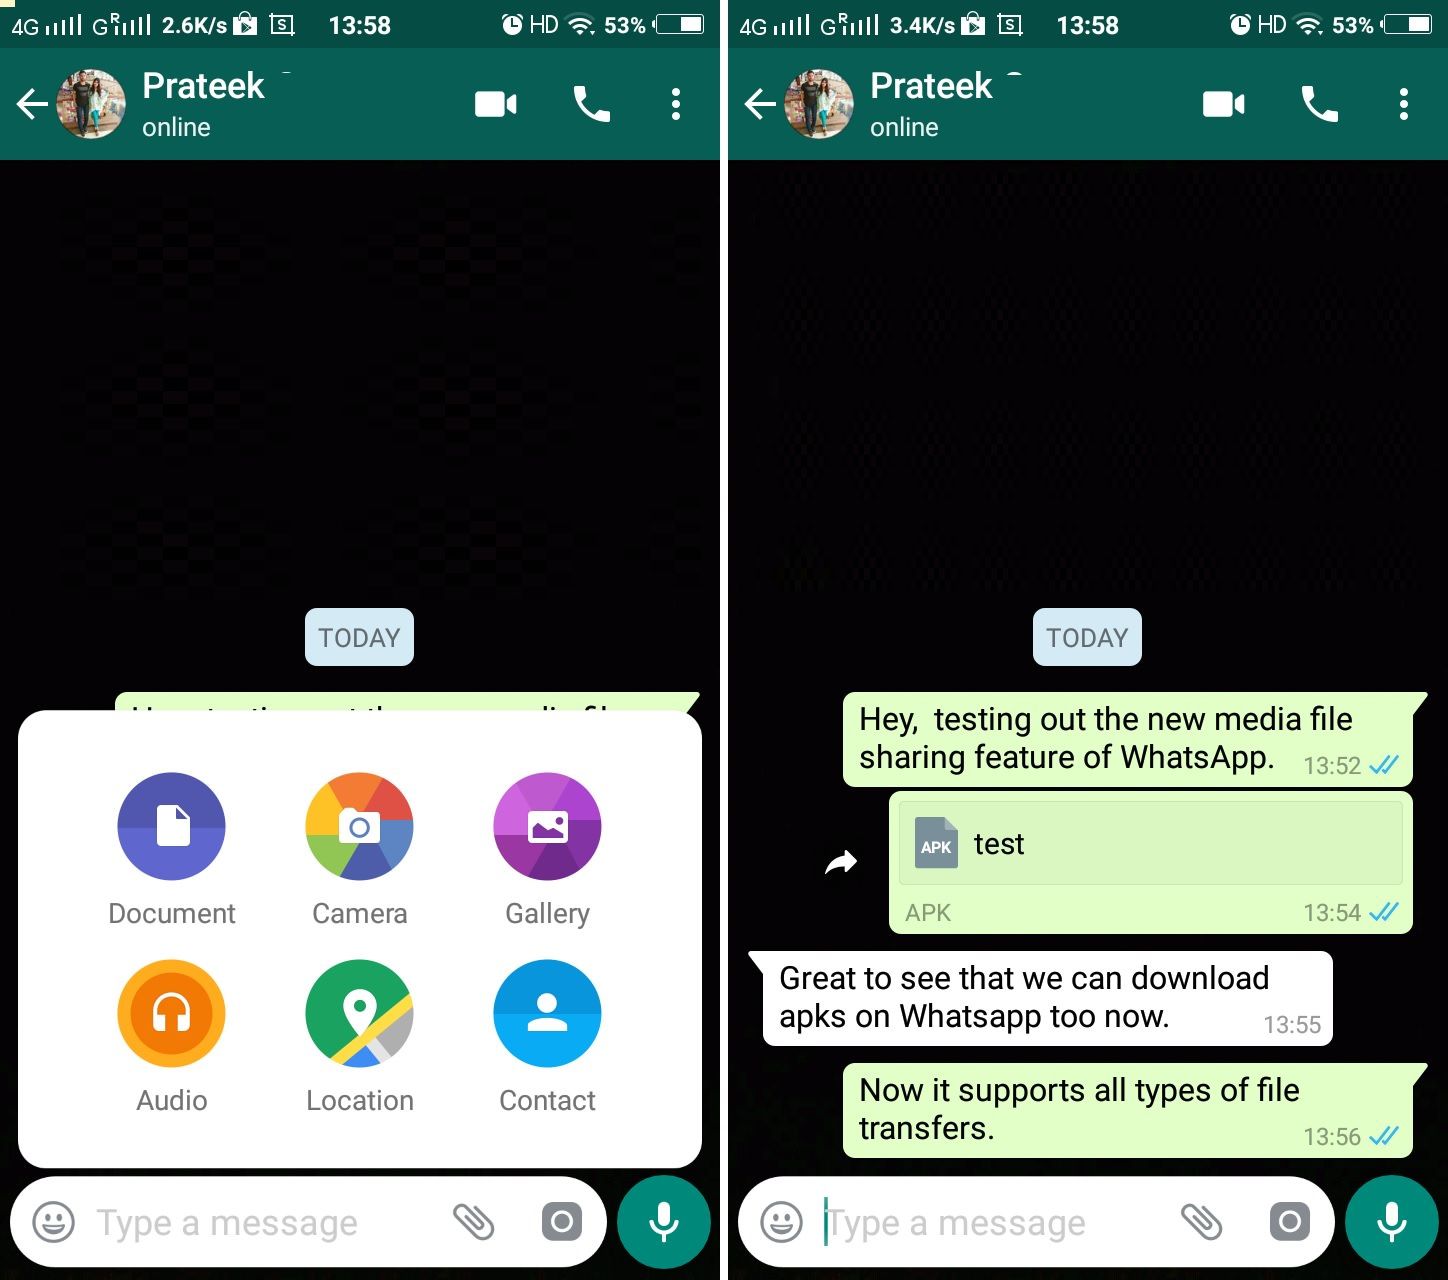 WhatsApp for Android now lets you share any type of file | 91mobiles.com